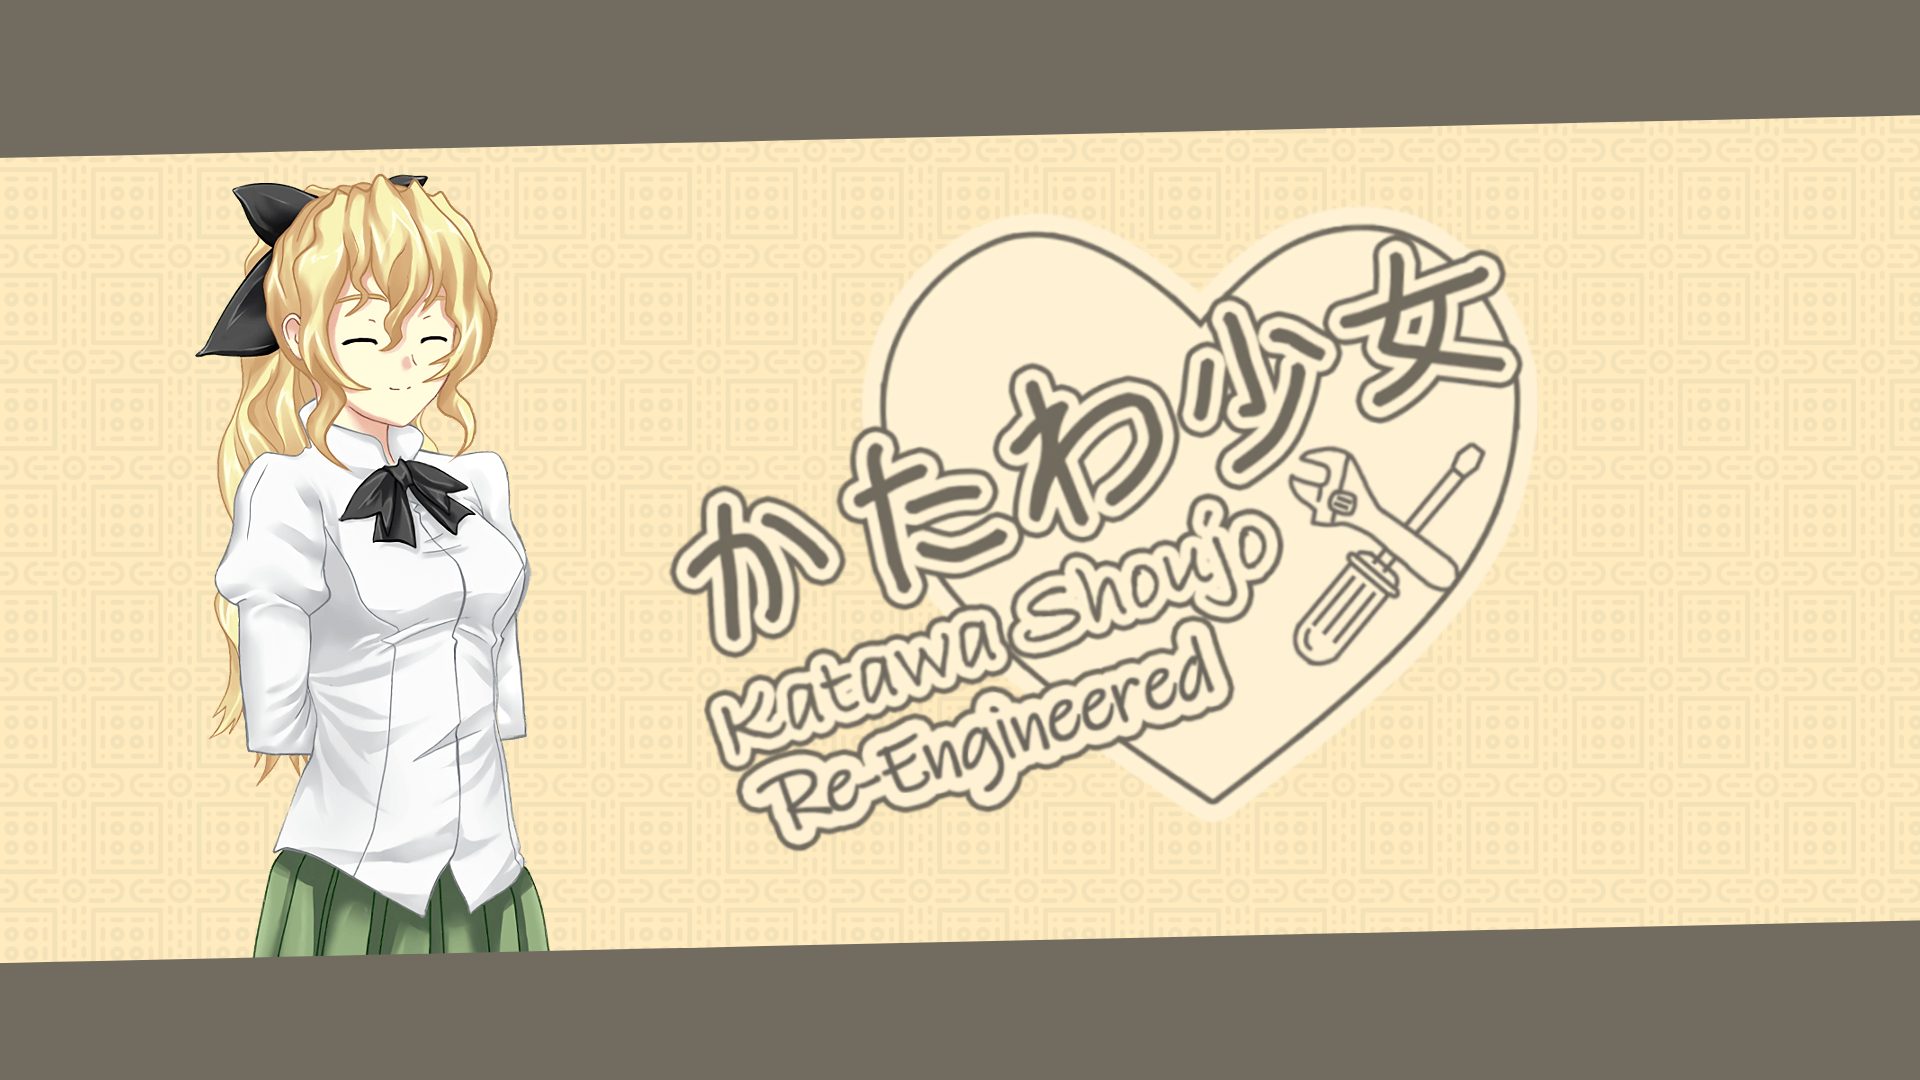 [Interview] Accessibility for All: Katawa Shoujo Re-Engineered Brings the Fan-Favorite Visual Novel to a New Audience